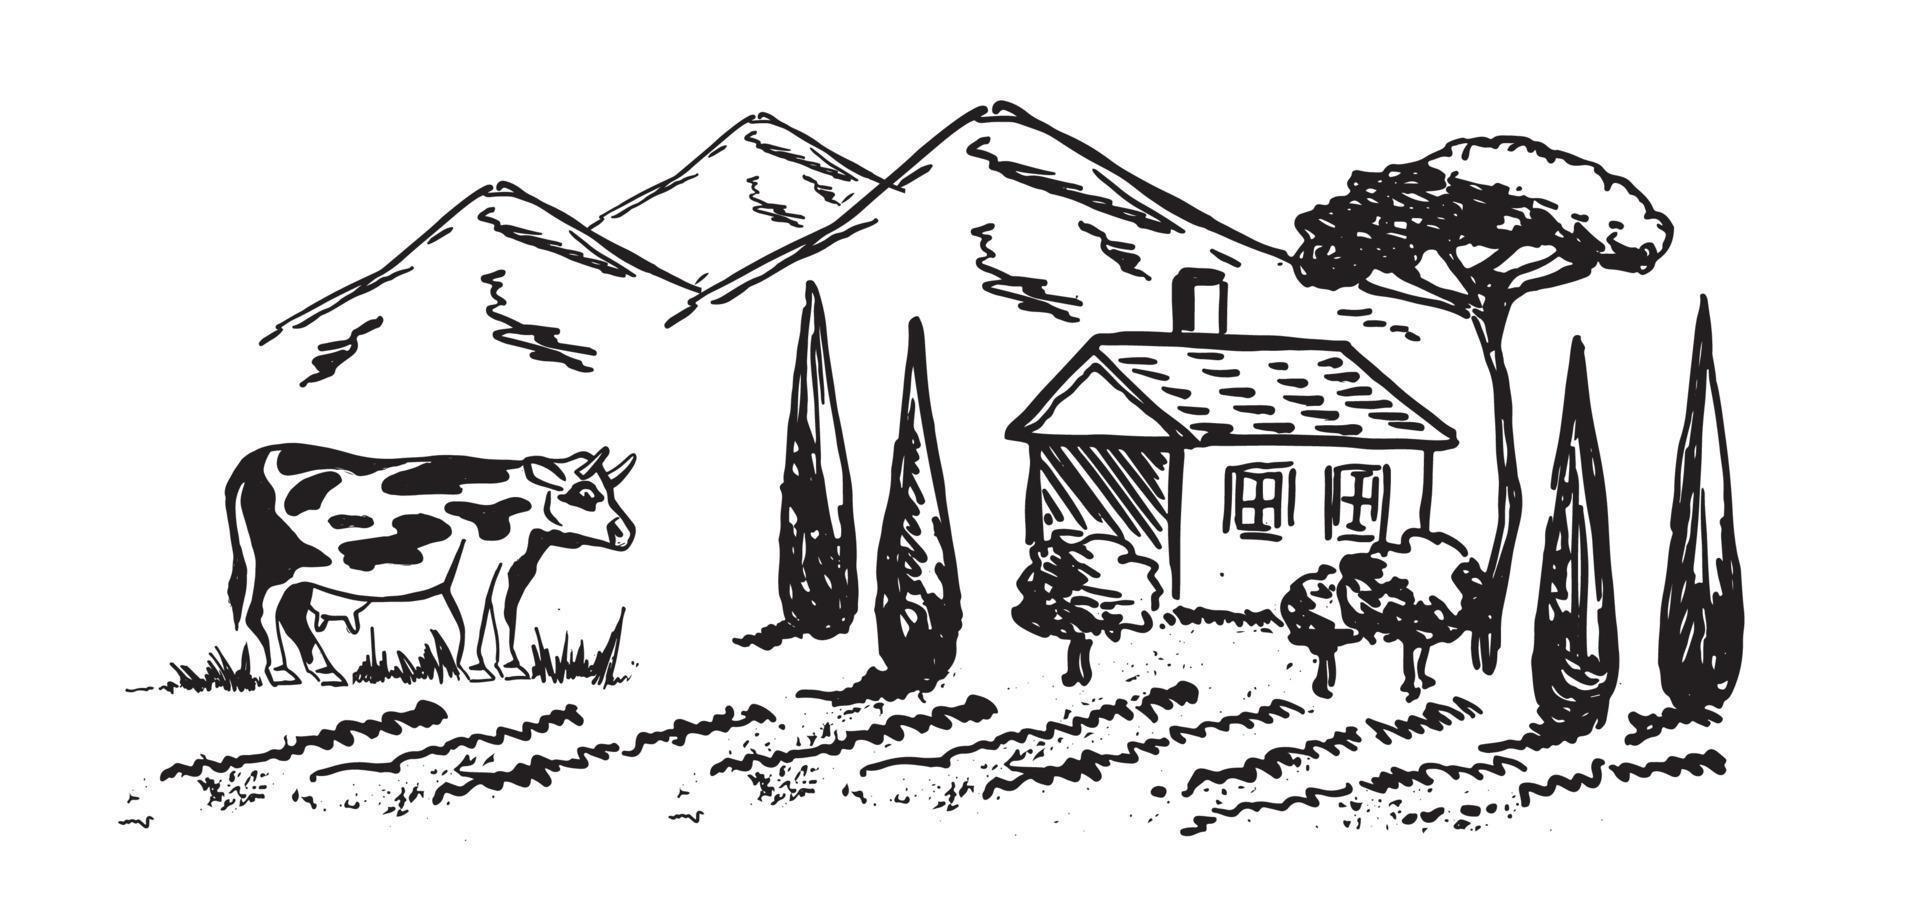 Mountain landscape. Cow in black. Windmill. Sketch style, Vector illustration.